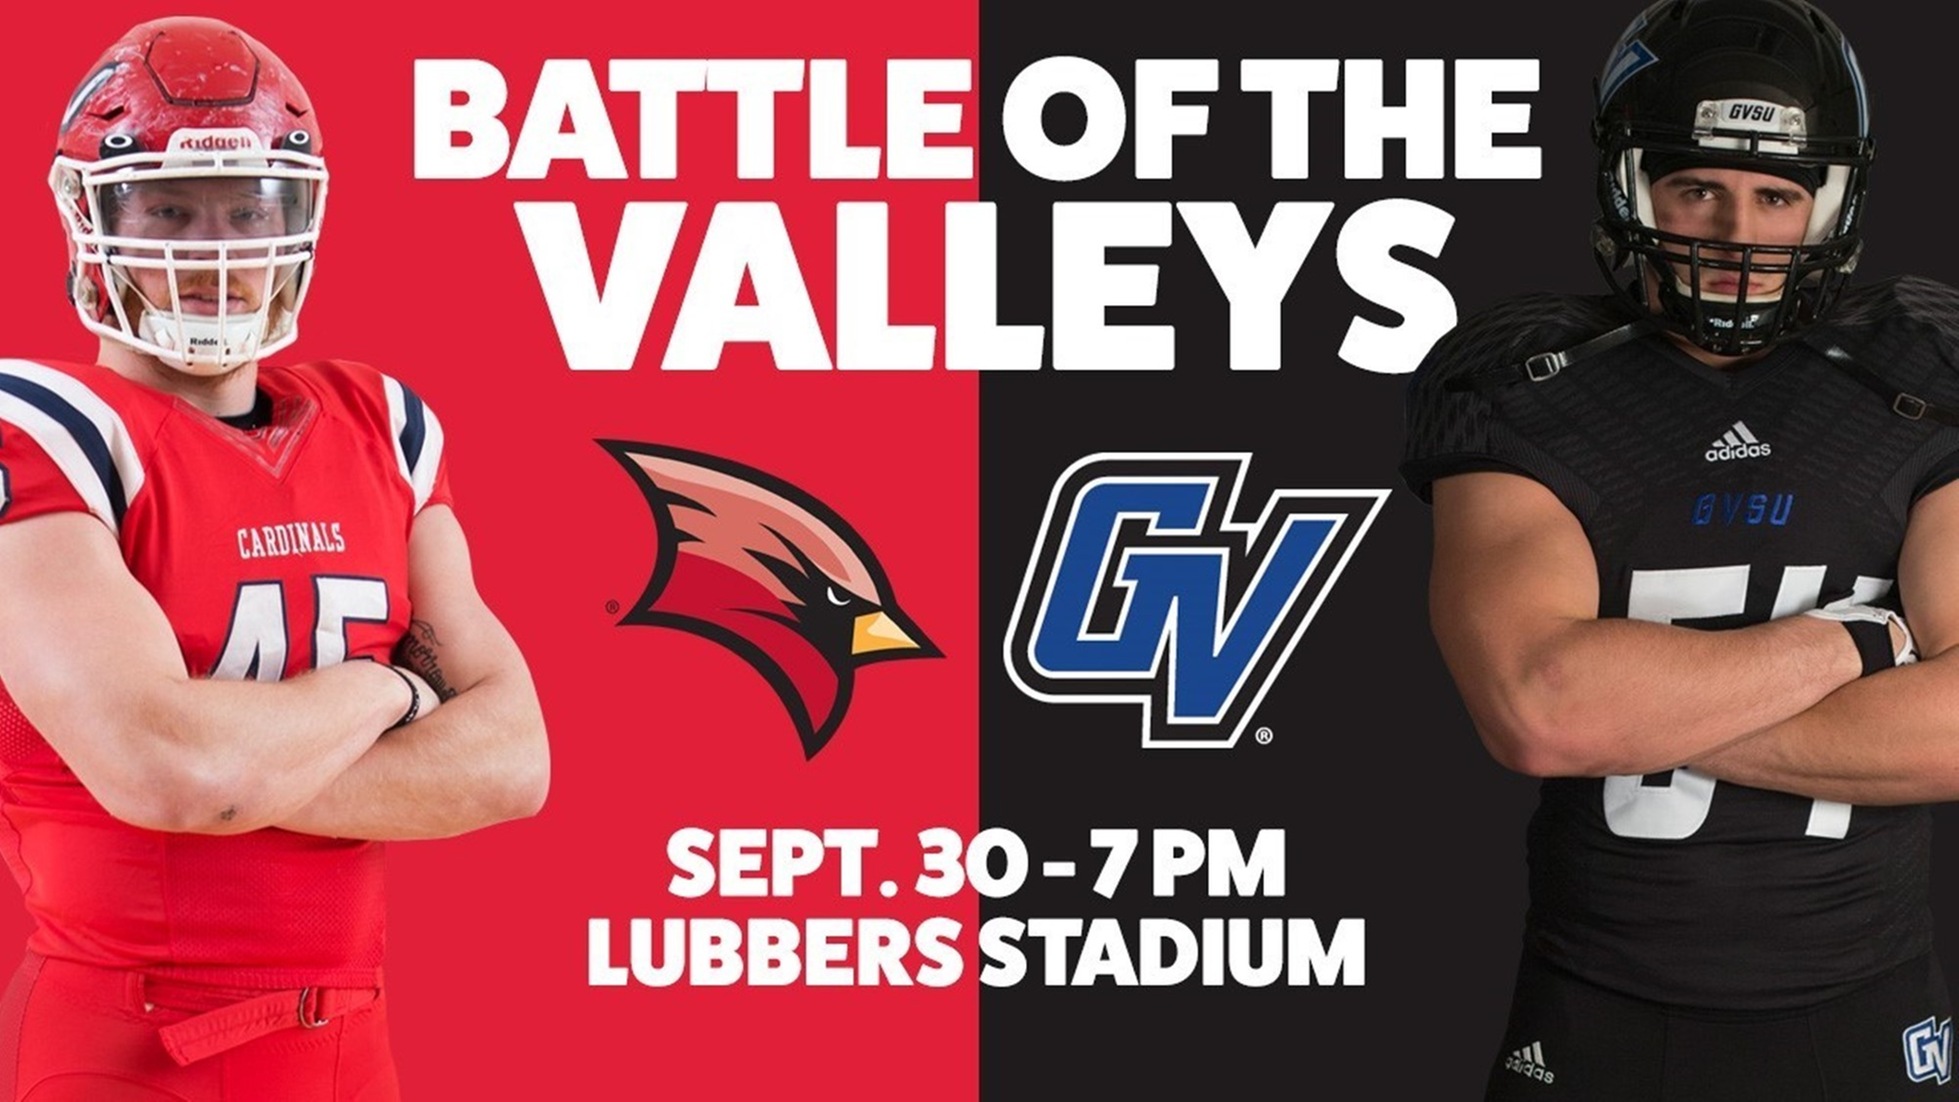 Saturday's Battle of the Valleys Football Game to Feature New Look